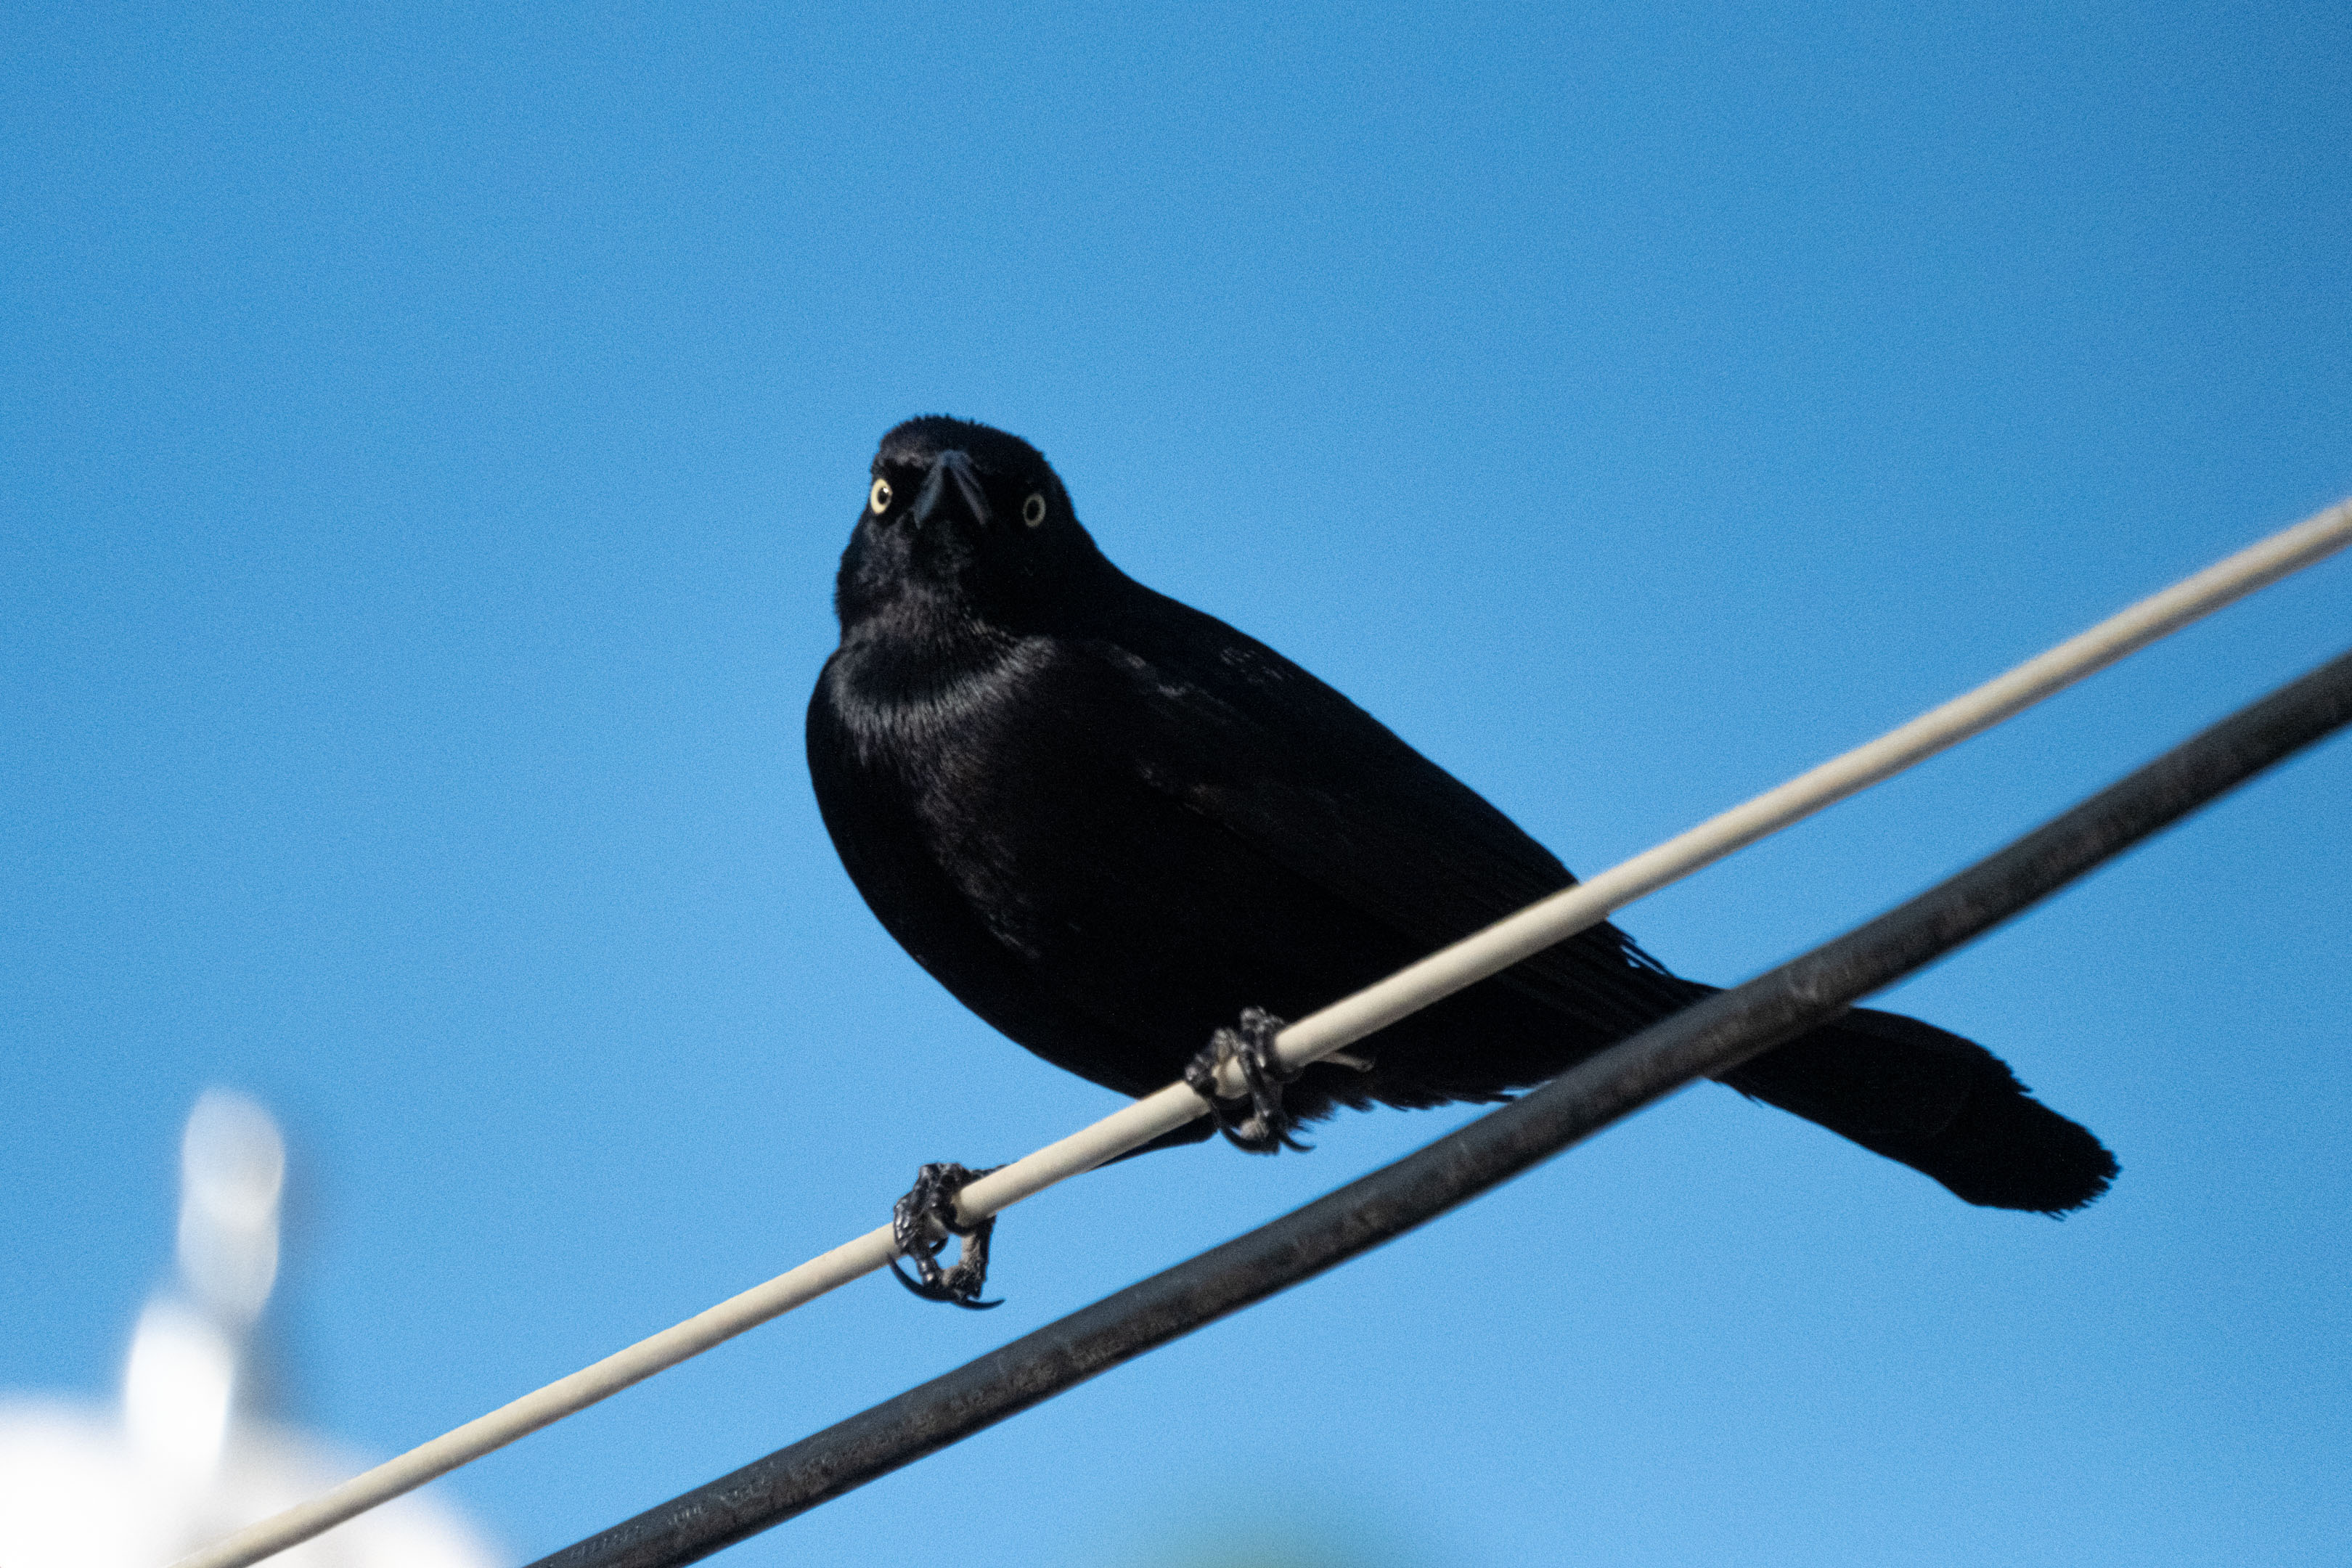 a black chango standing on a wire with the sky in the background, staring at the camera